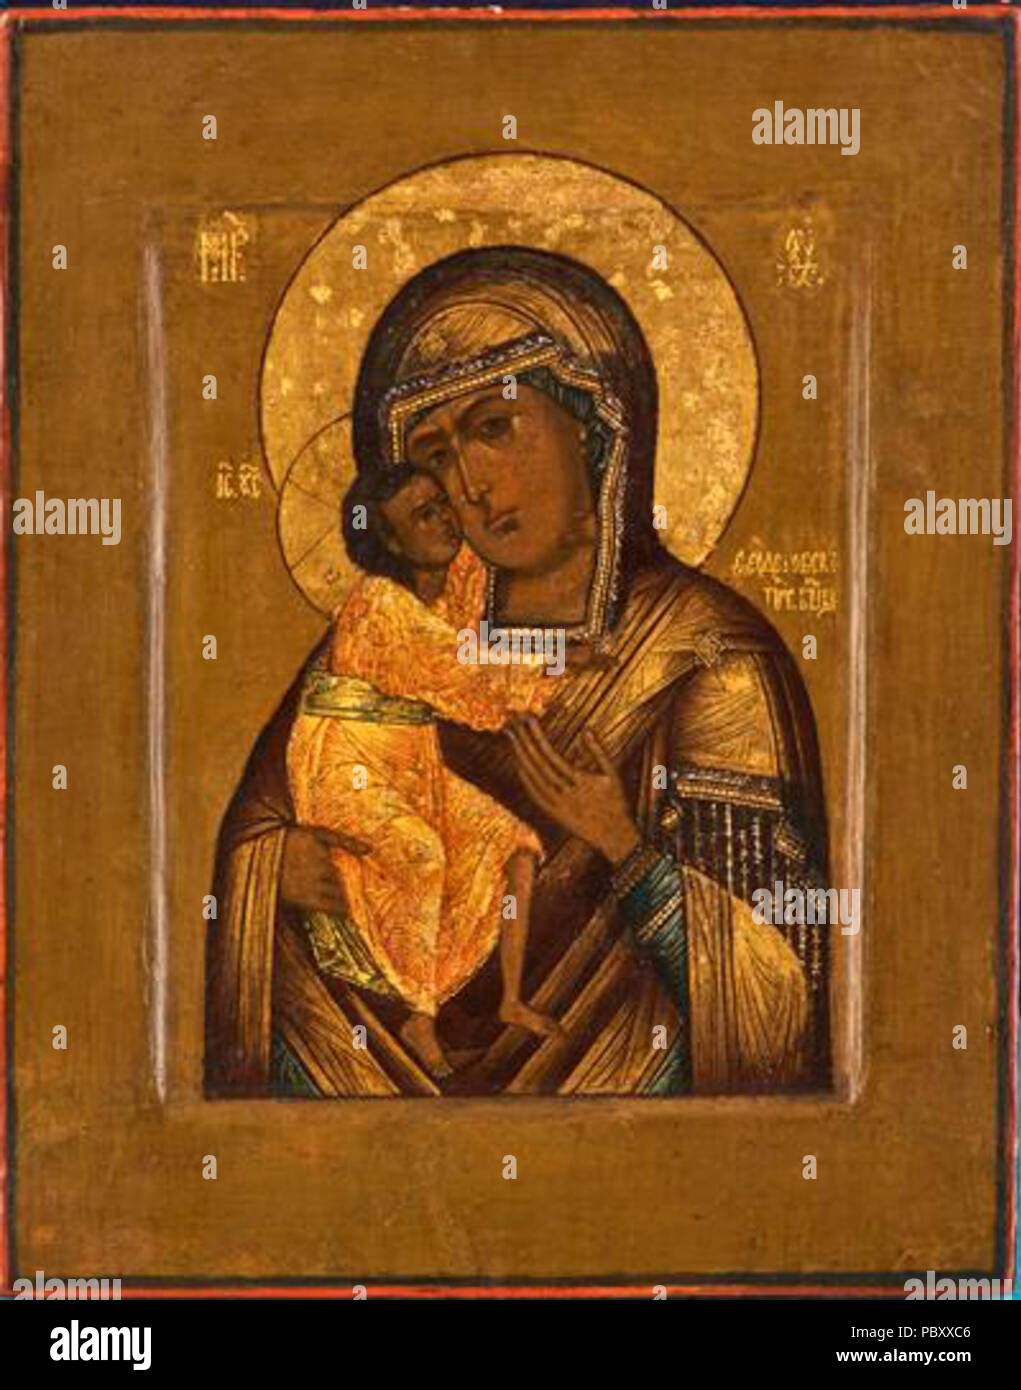 206 Feodorovskaya in cut-back centre portion of the icon panel Stock Photo